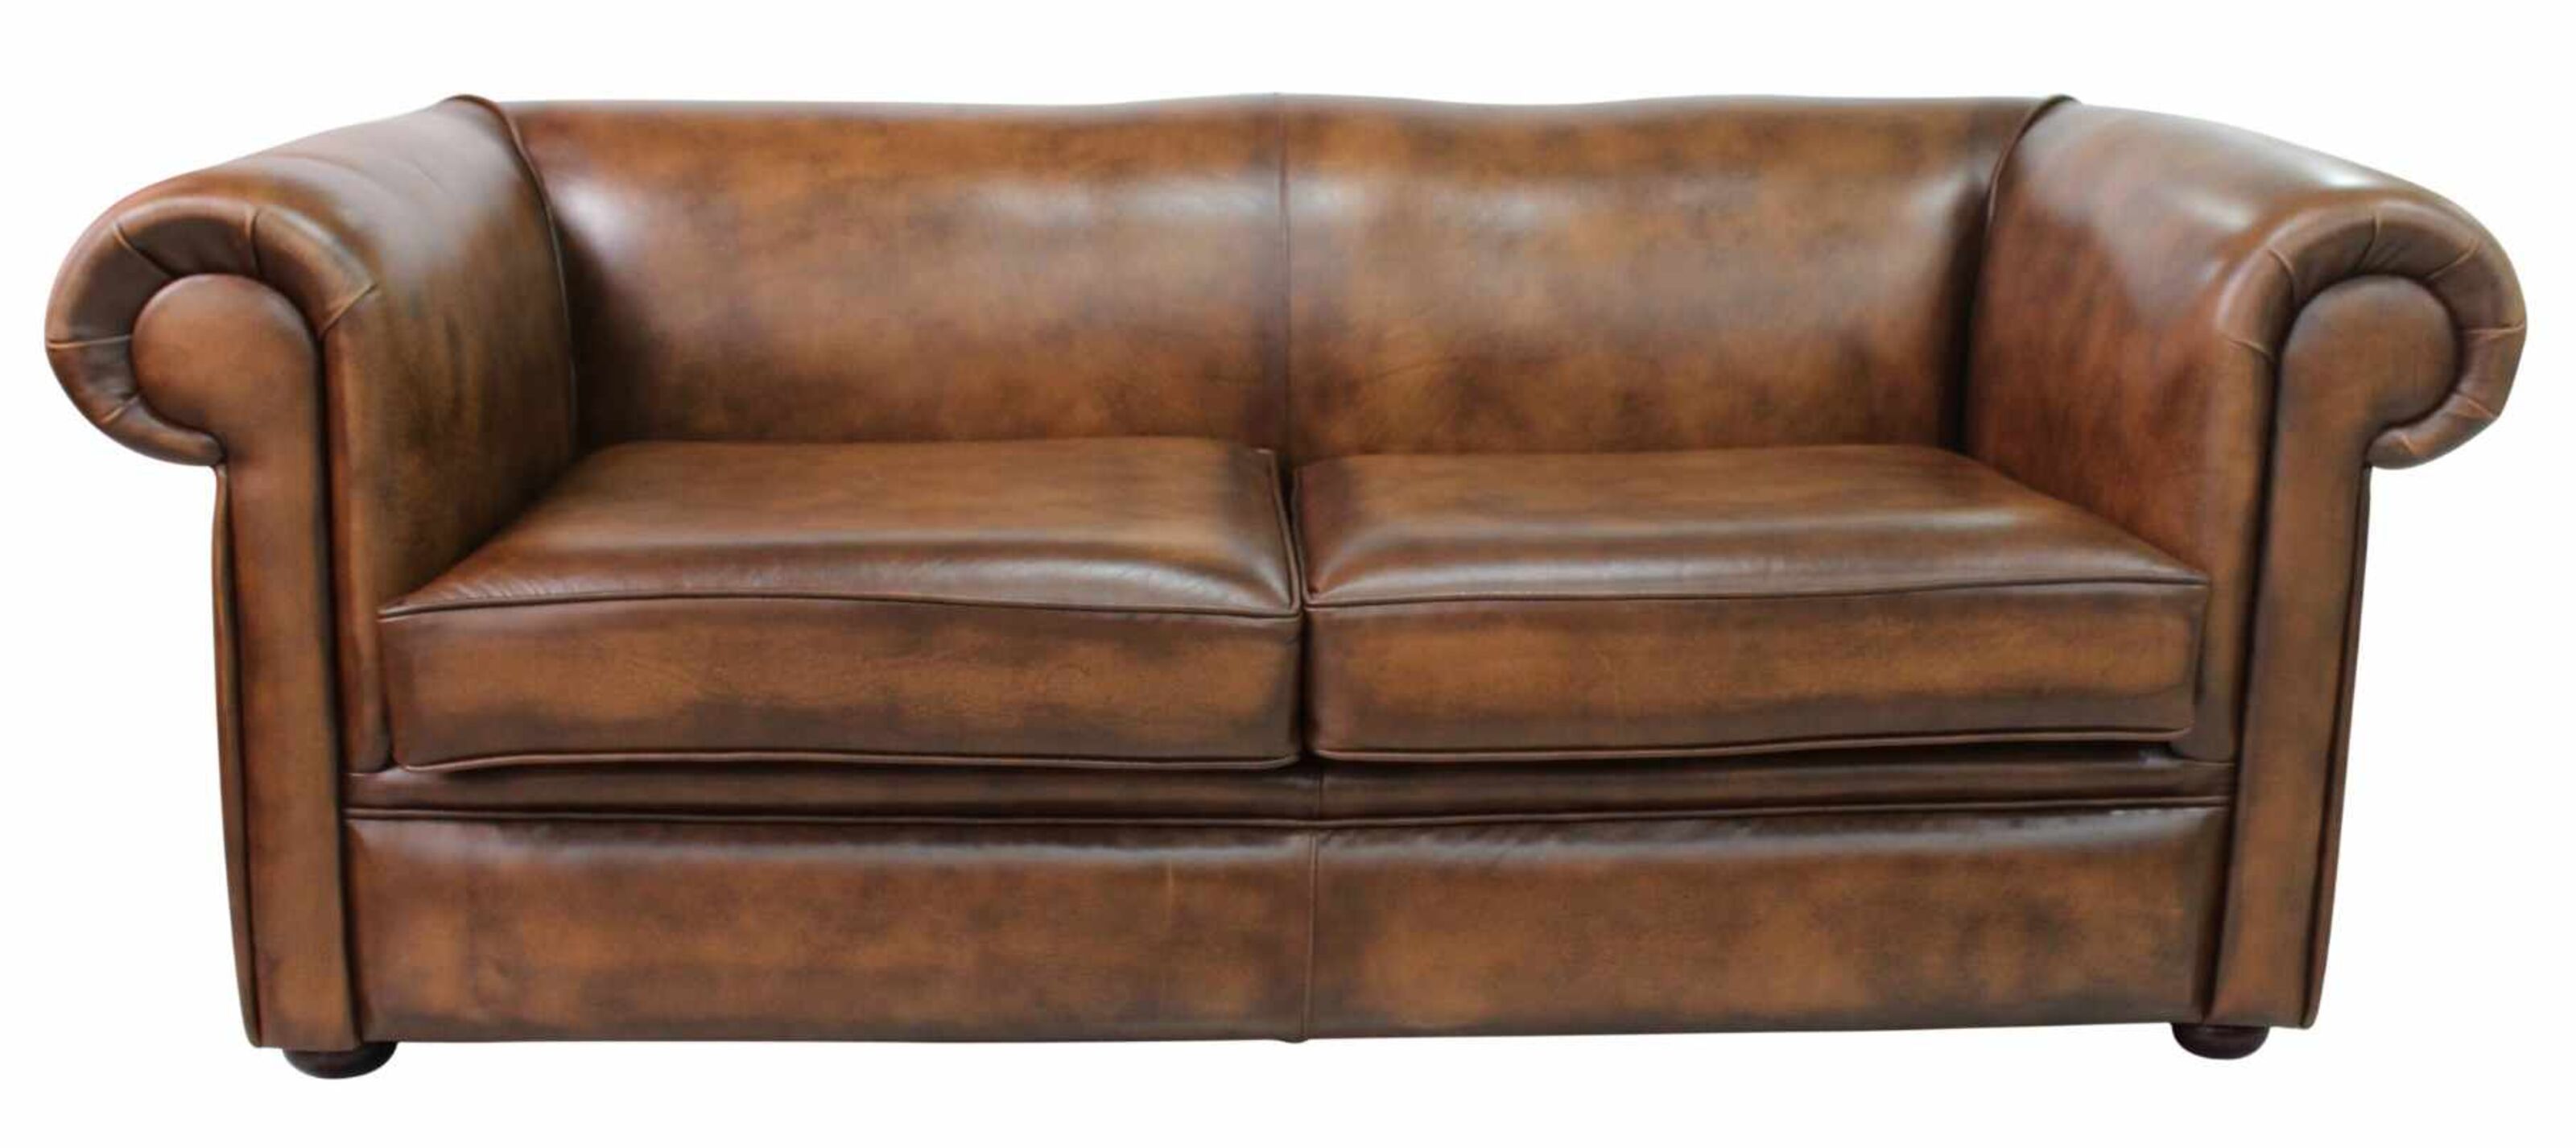 Decoding Excellence Assessing the Quality and Appeal of Chesterfield Sofas  %Post Title